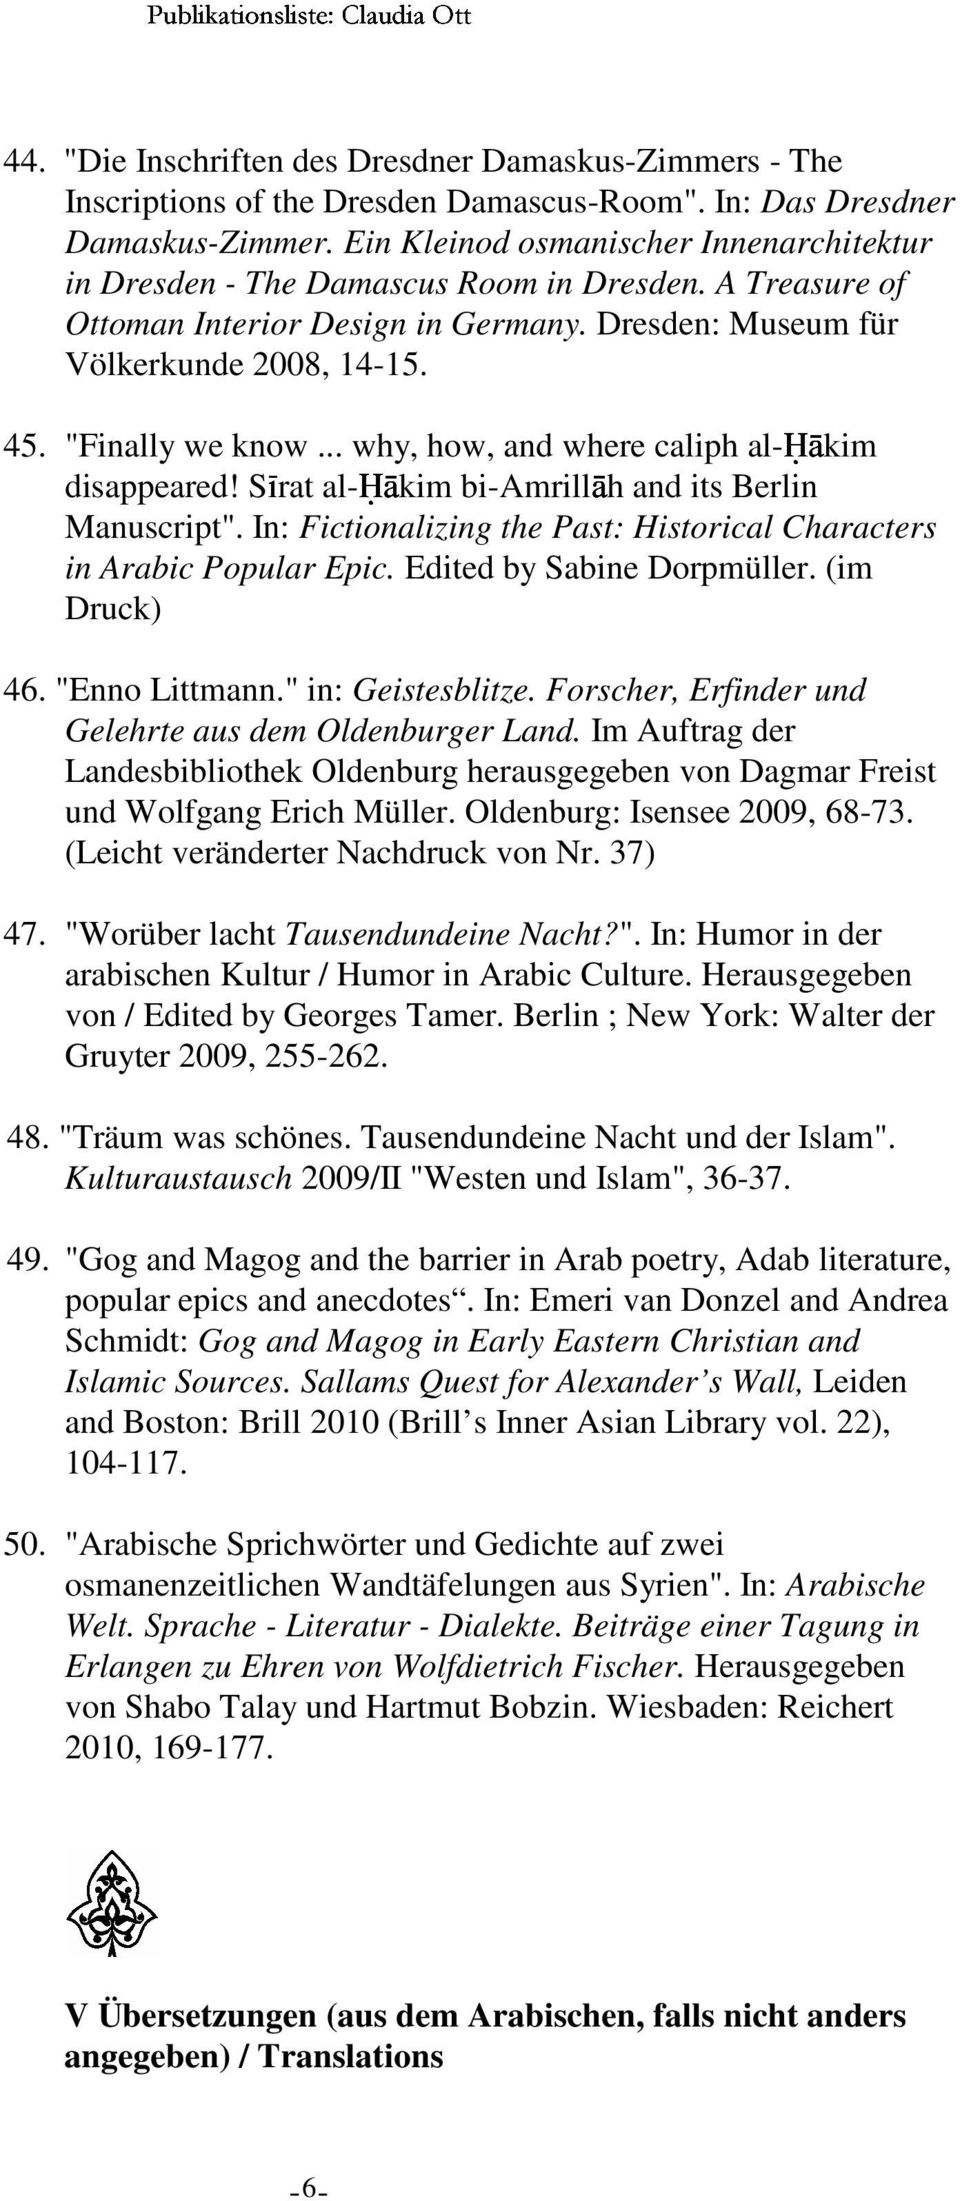 .. why, how, and where caliph al-¼ākim disappeared! SÍrat al-¼ākim bi-amrillāh and its Berlin Manuscript". In: Fictionalizing the Past: Historical Characters in Arabic Popular Epic.